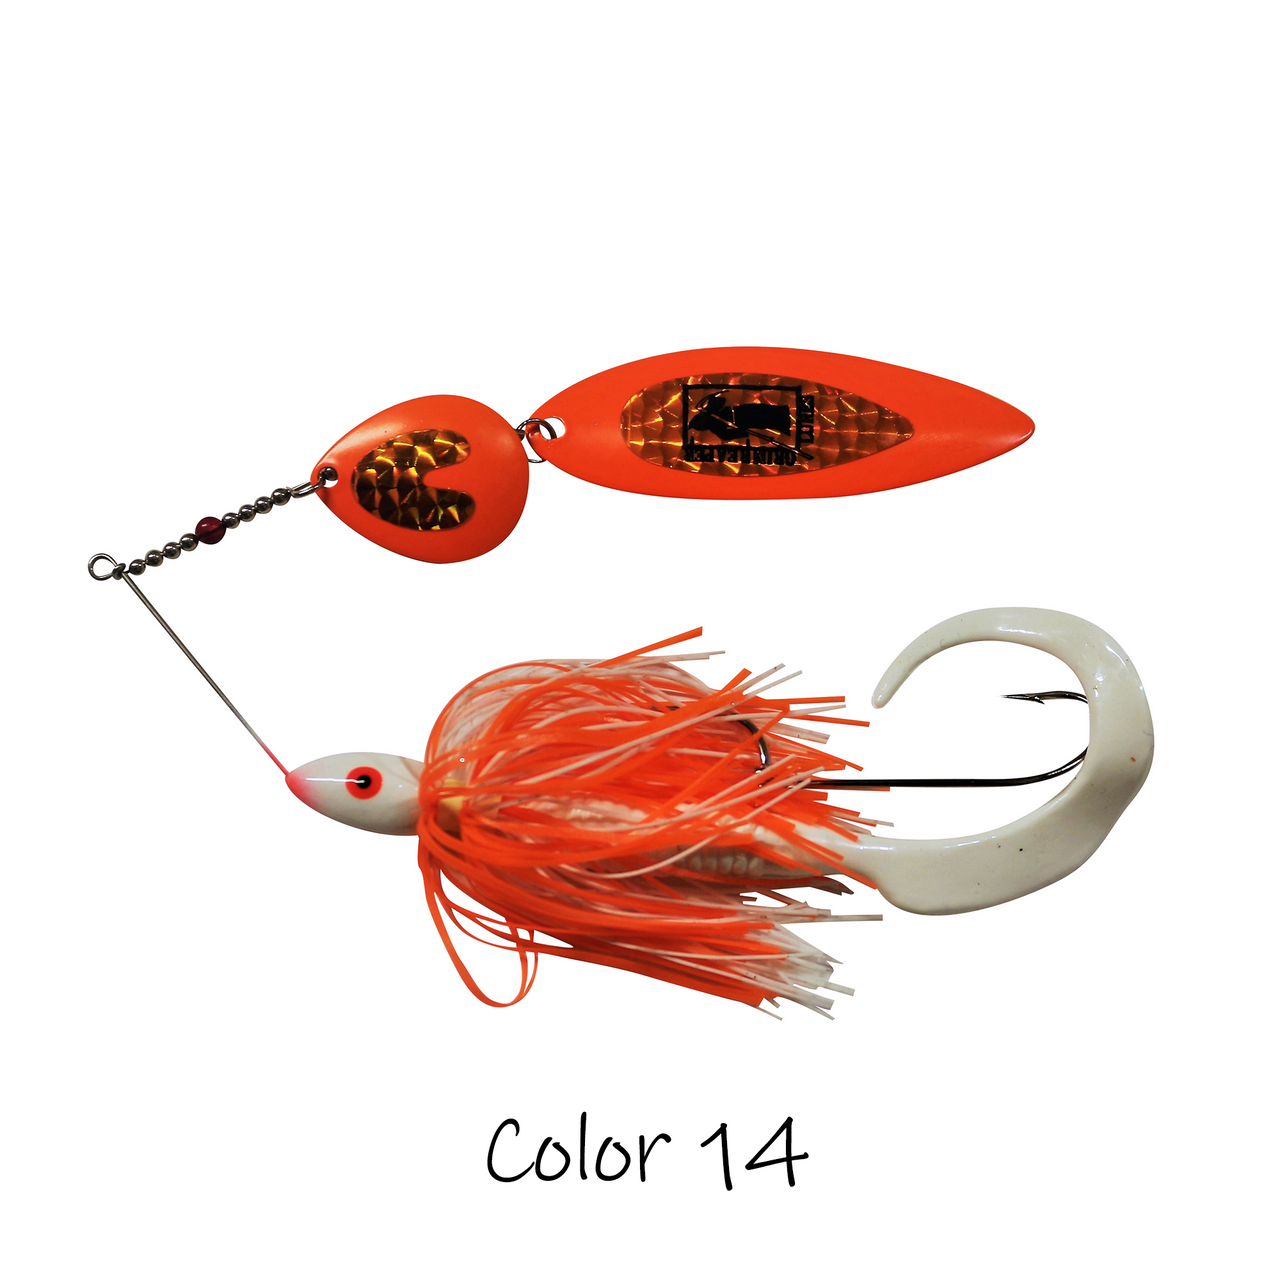 5 Pack Rainbow Soft Bait Fishing Spinner Flathead Catfish Bait With T Tail  And Sequin Swing For Bass Saltwater And Freshwater Fishing Lures From  Yala_products, $7.3